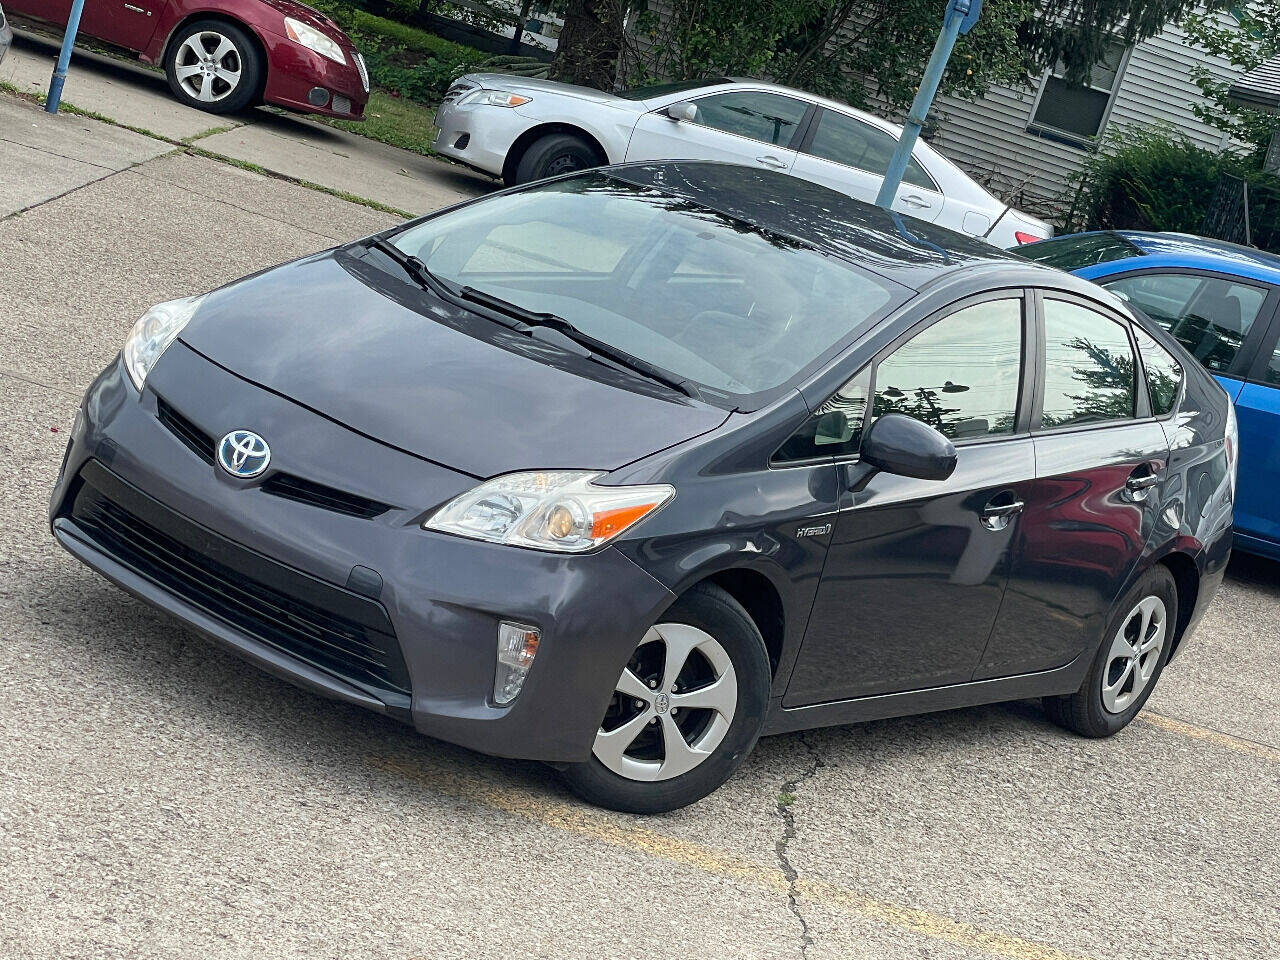 2012 Toyota Prius For Sale In Rapid City, SD - Carsforsale.com®